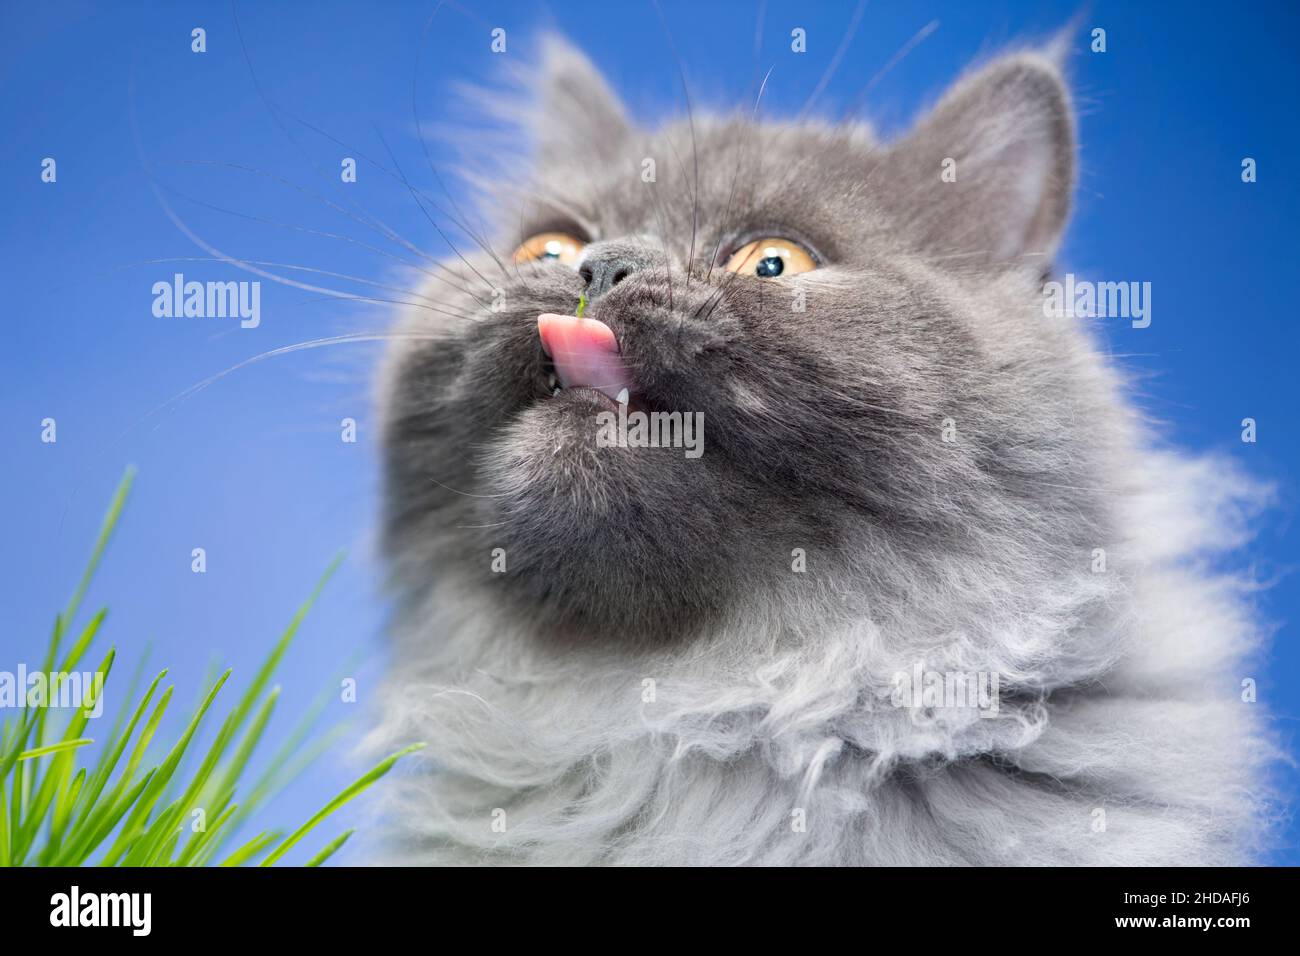 Funny close up portrait of a happy grey cat with his tongue out. Stock Photo